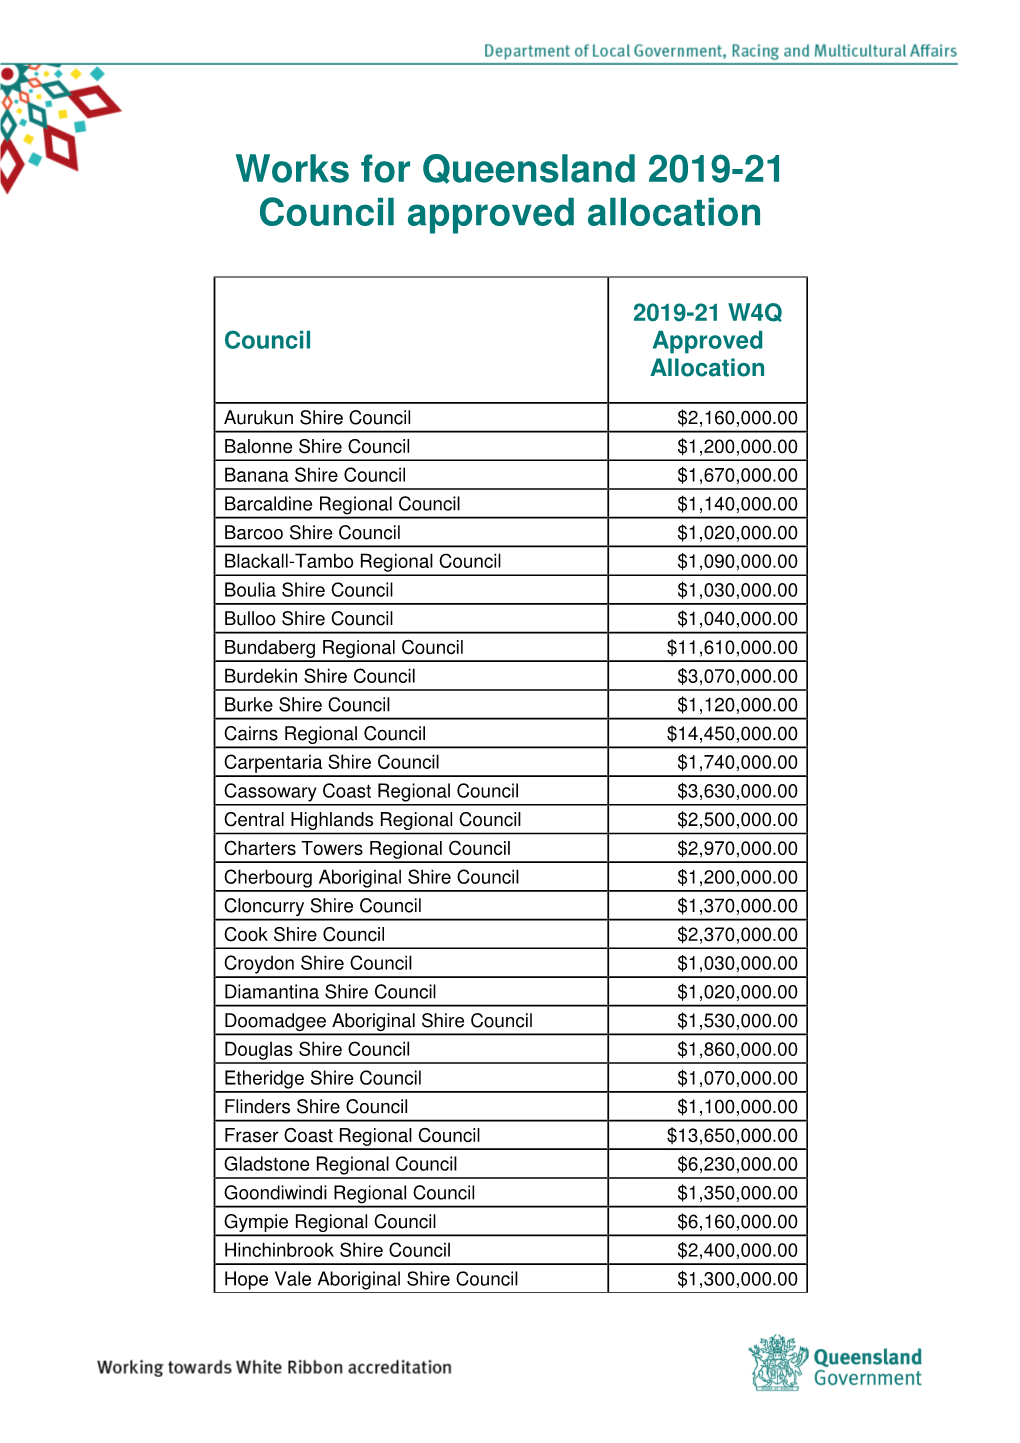 Works for Queensland 2019-21 Council Approved Allocation